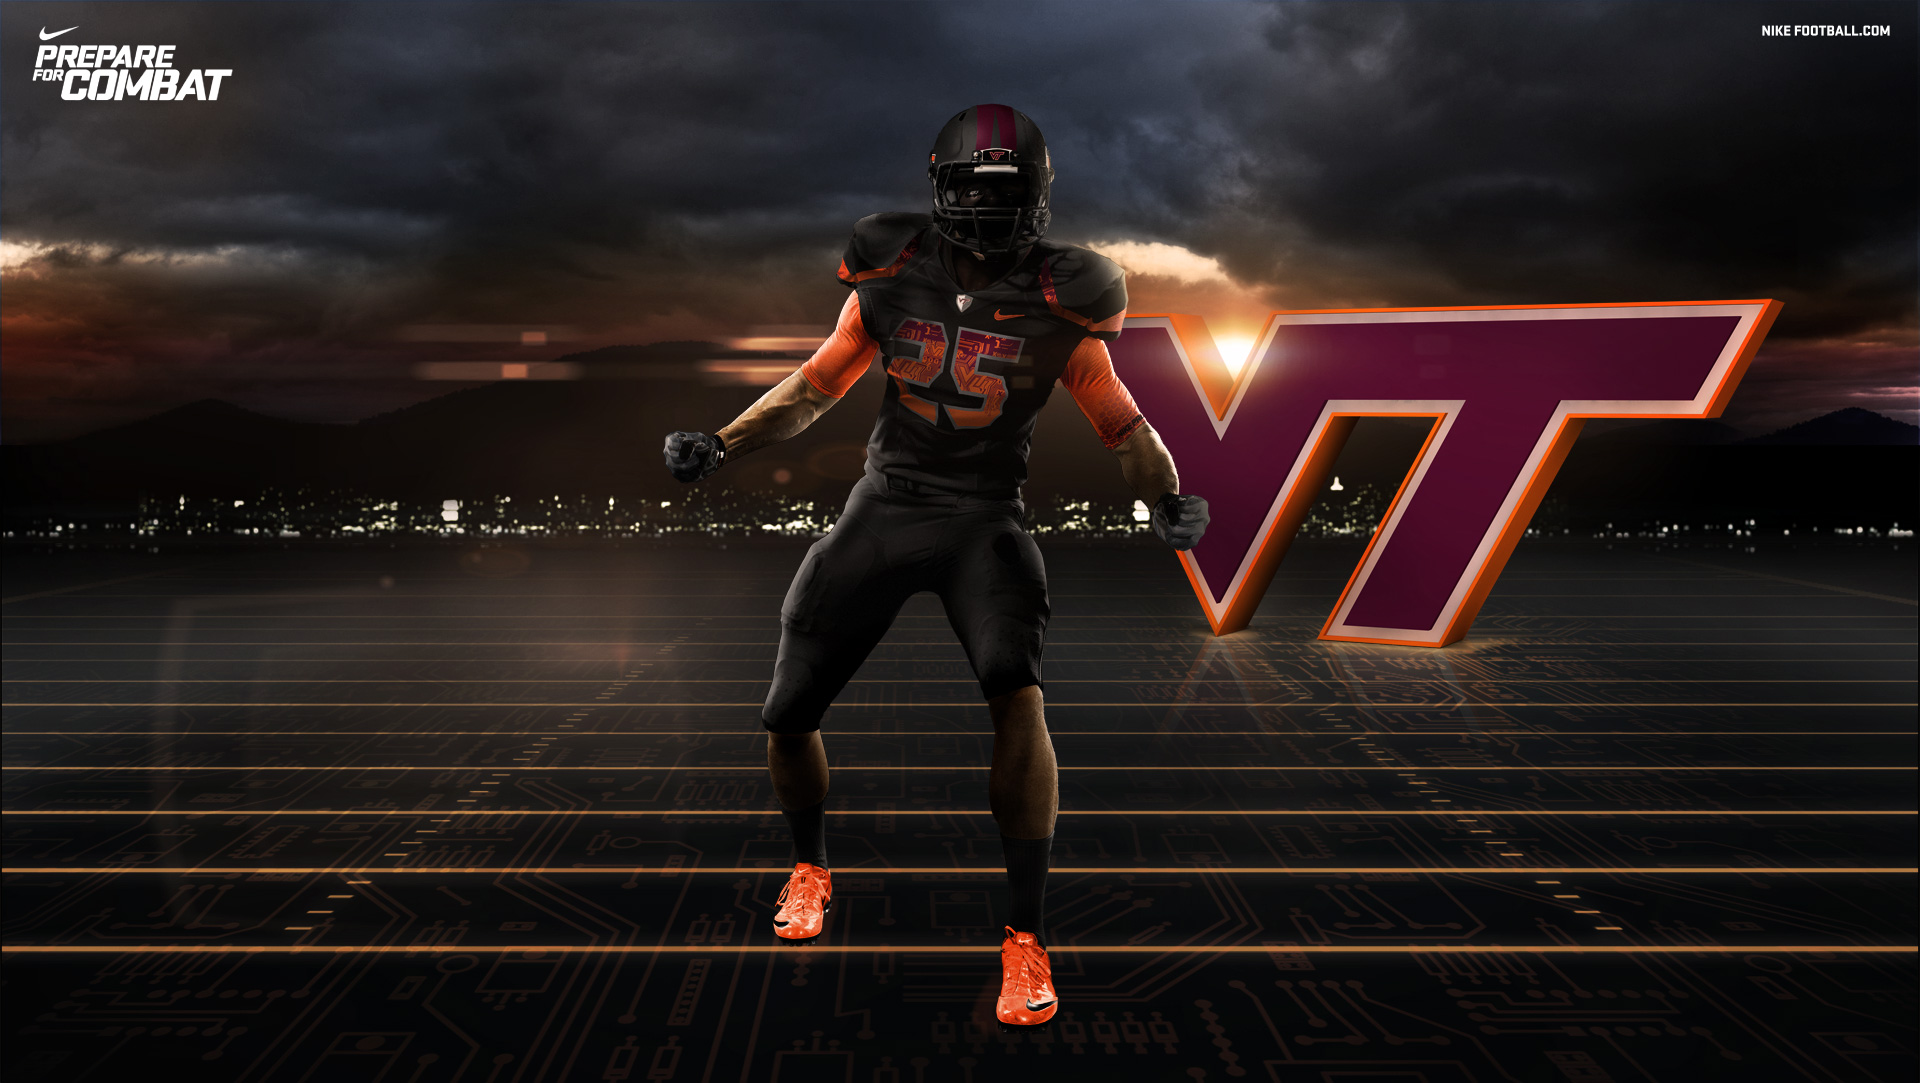 Football Virginia Tech With Resolutions